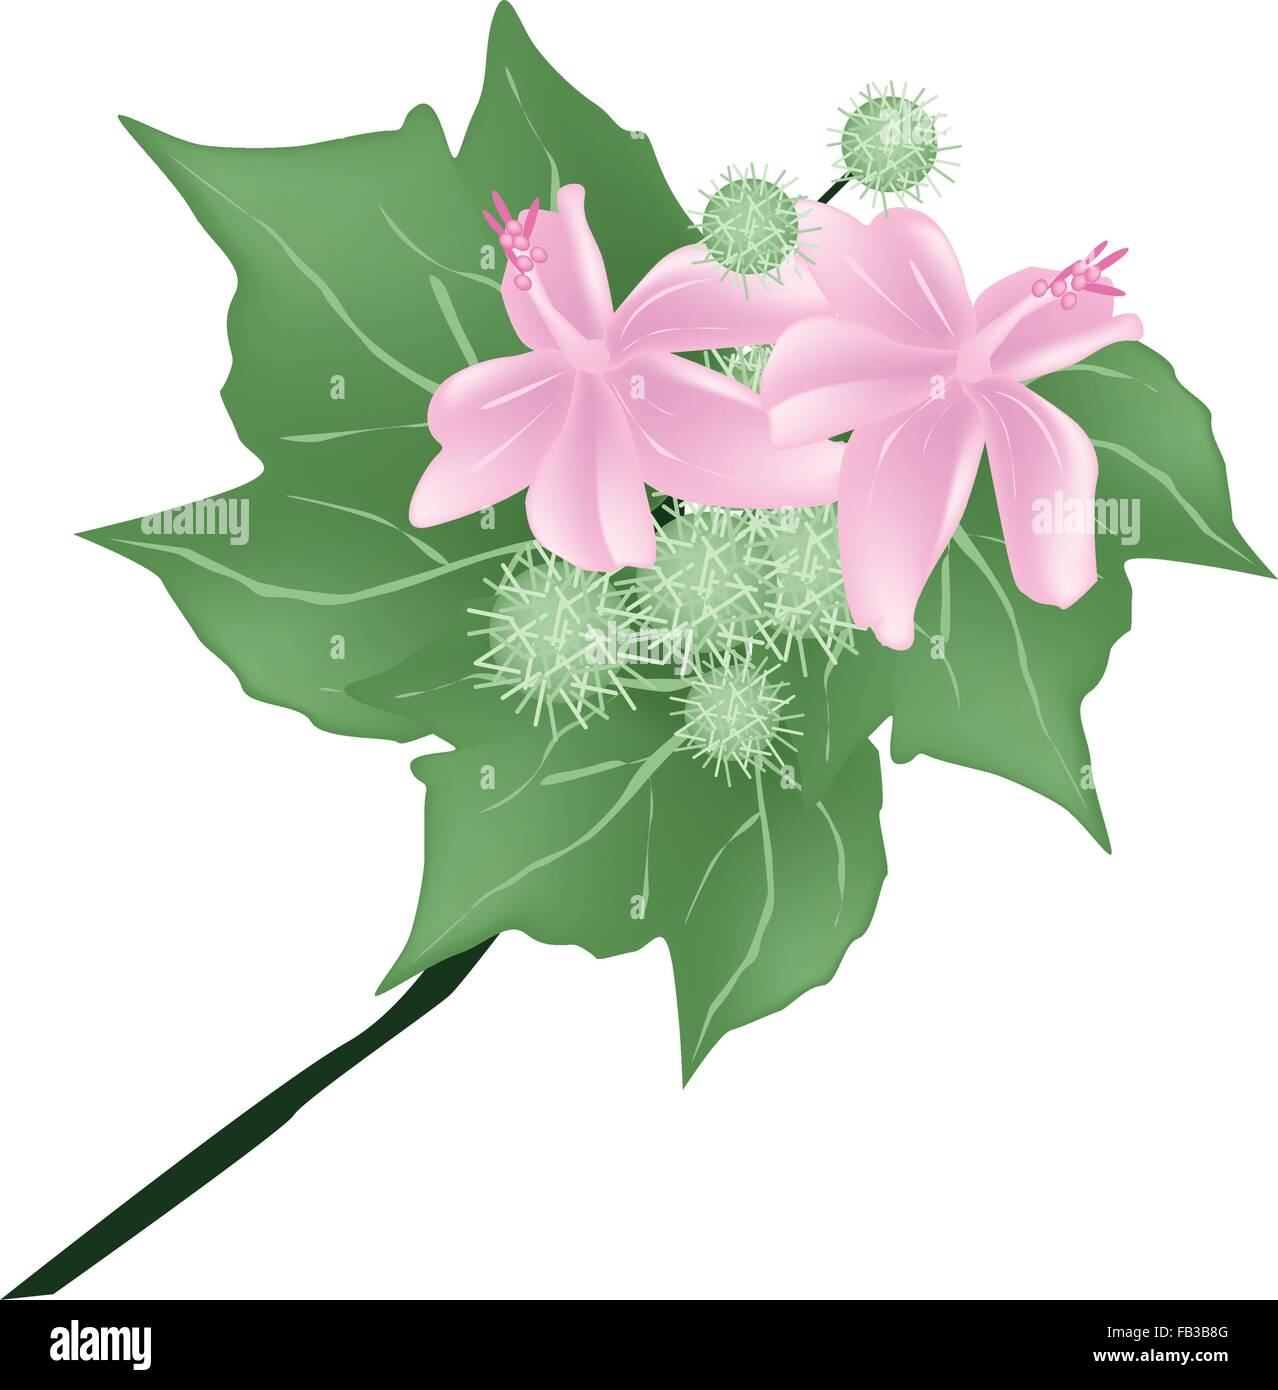 Flower, Illustration of Fresh Pink Urena Lobata Flowers and  Fruit with Green Leaves on A Branch. Stock Vector